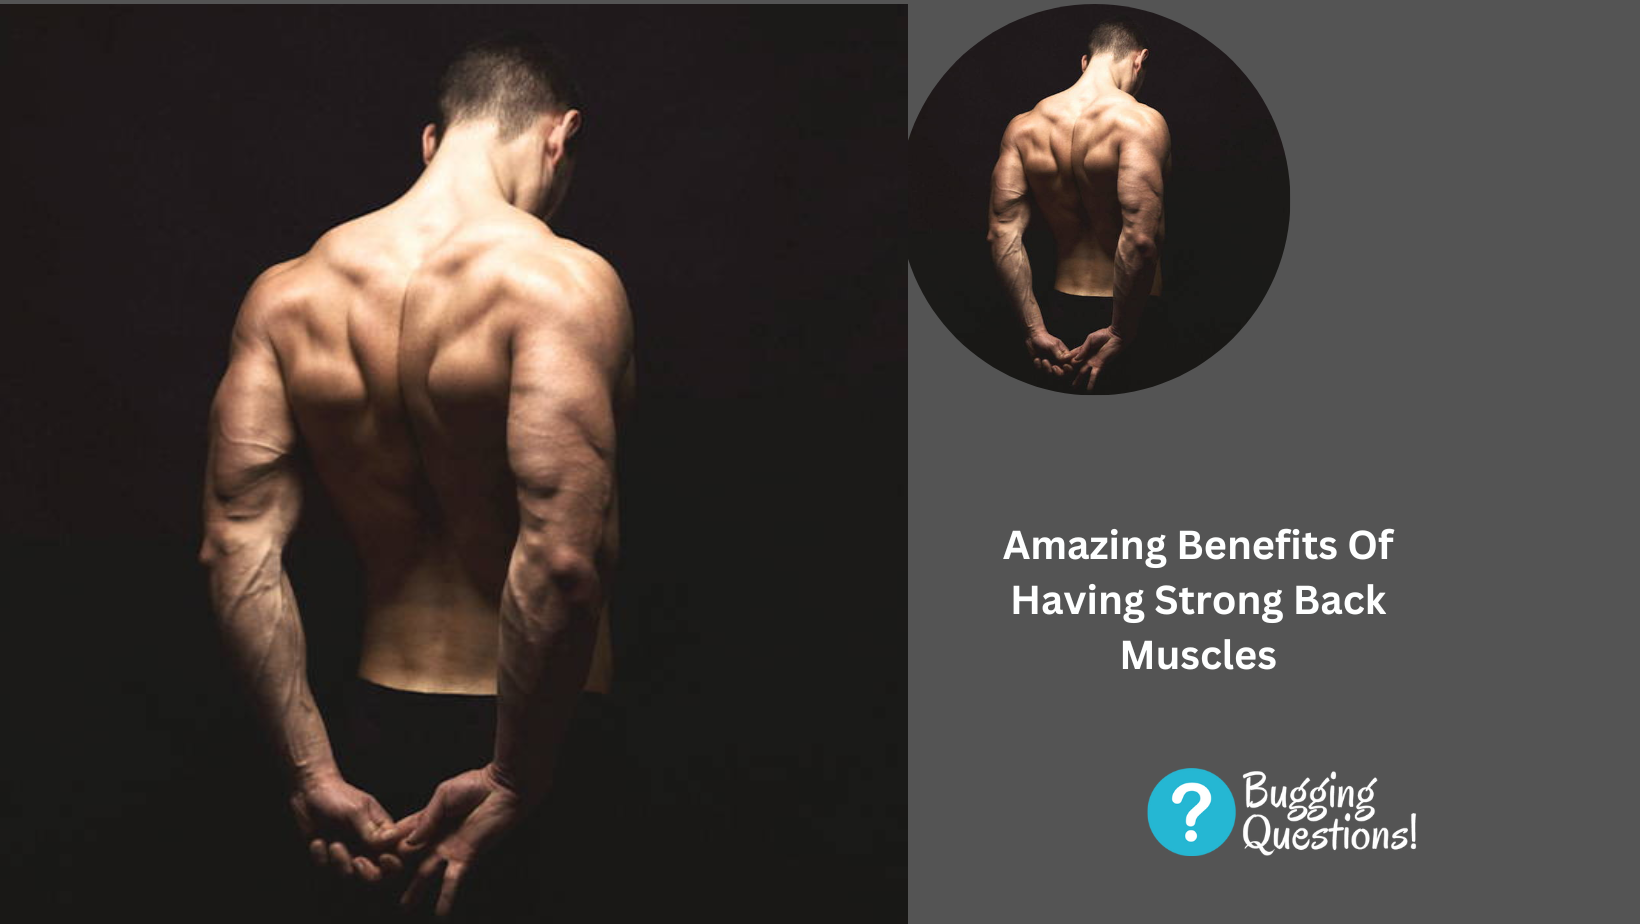 Amazing Benefits Of Having Strong Back Muscles